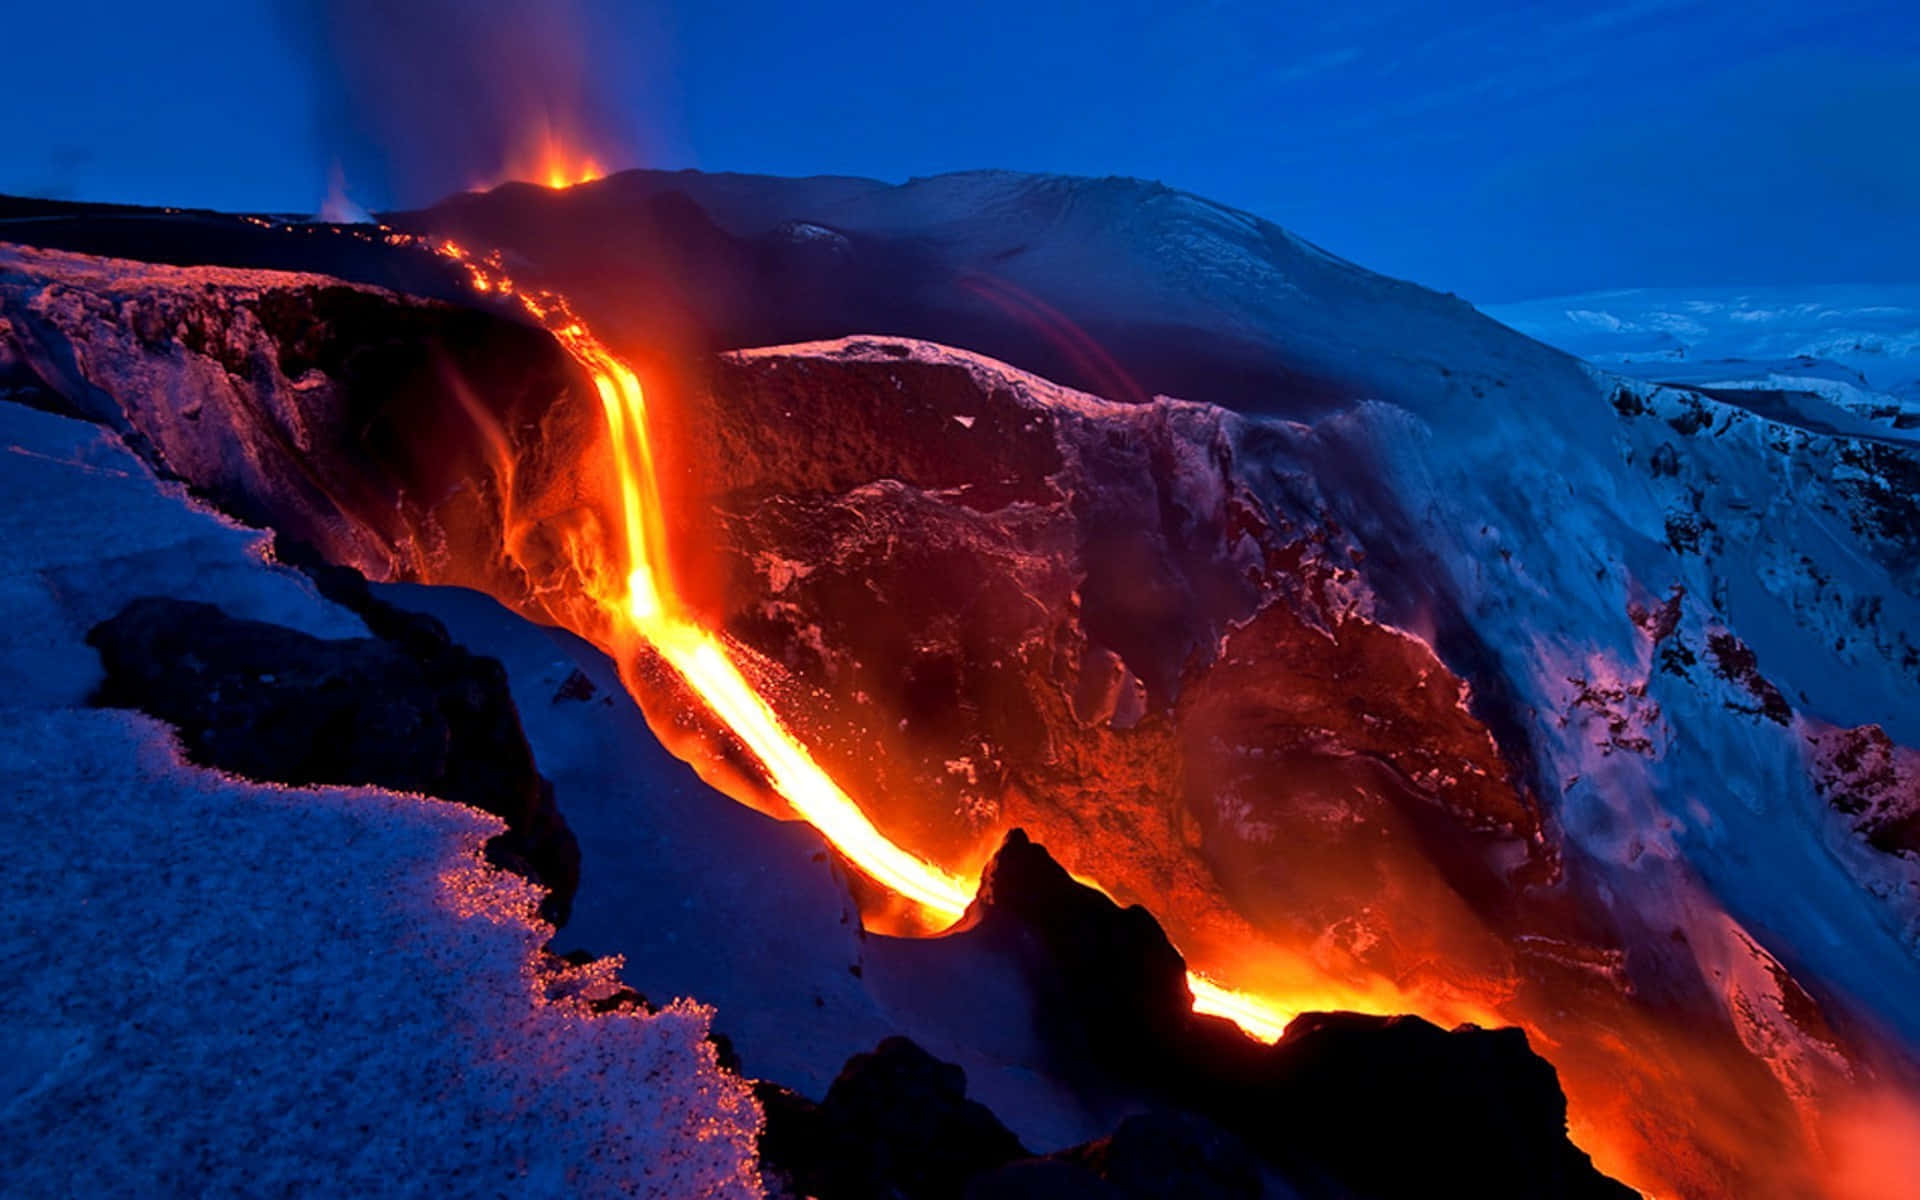 The beauty of a volcanic eruption